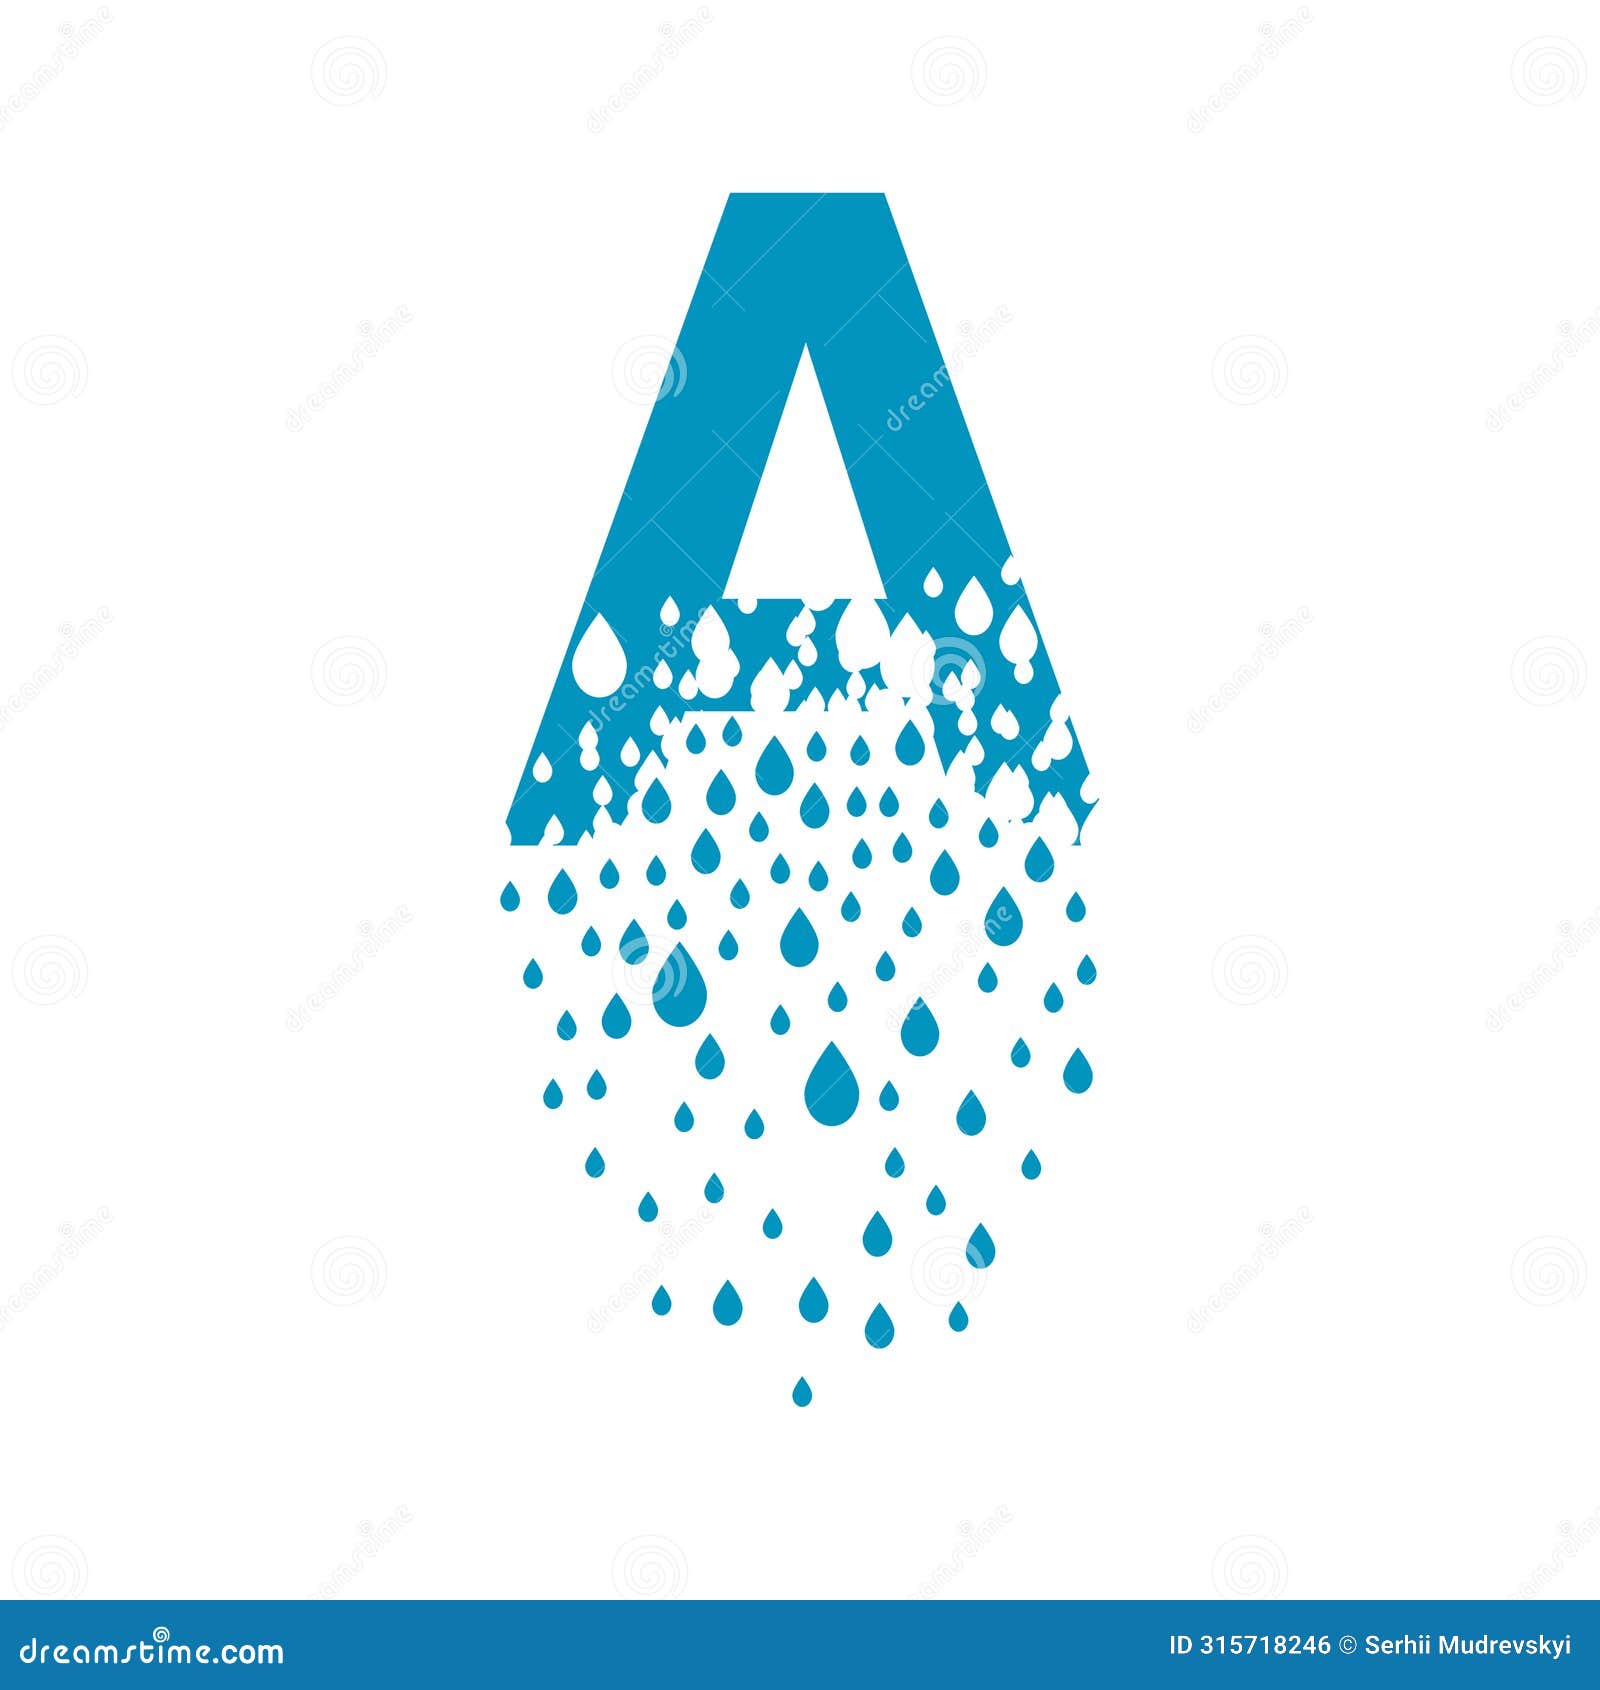 the letter a dissolves into droplets. drops of liquid fall out as precipitation. destruction effect. dispersion